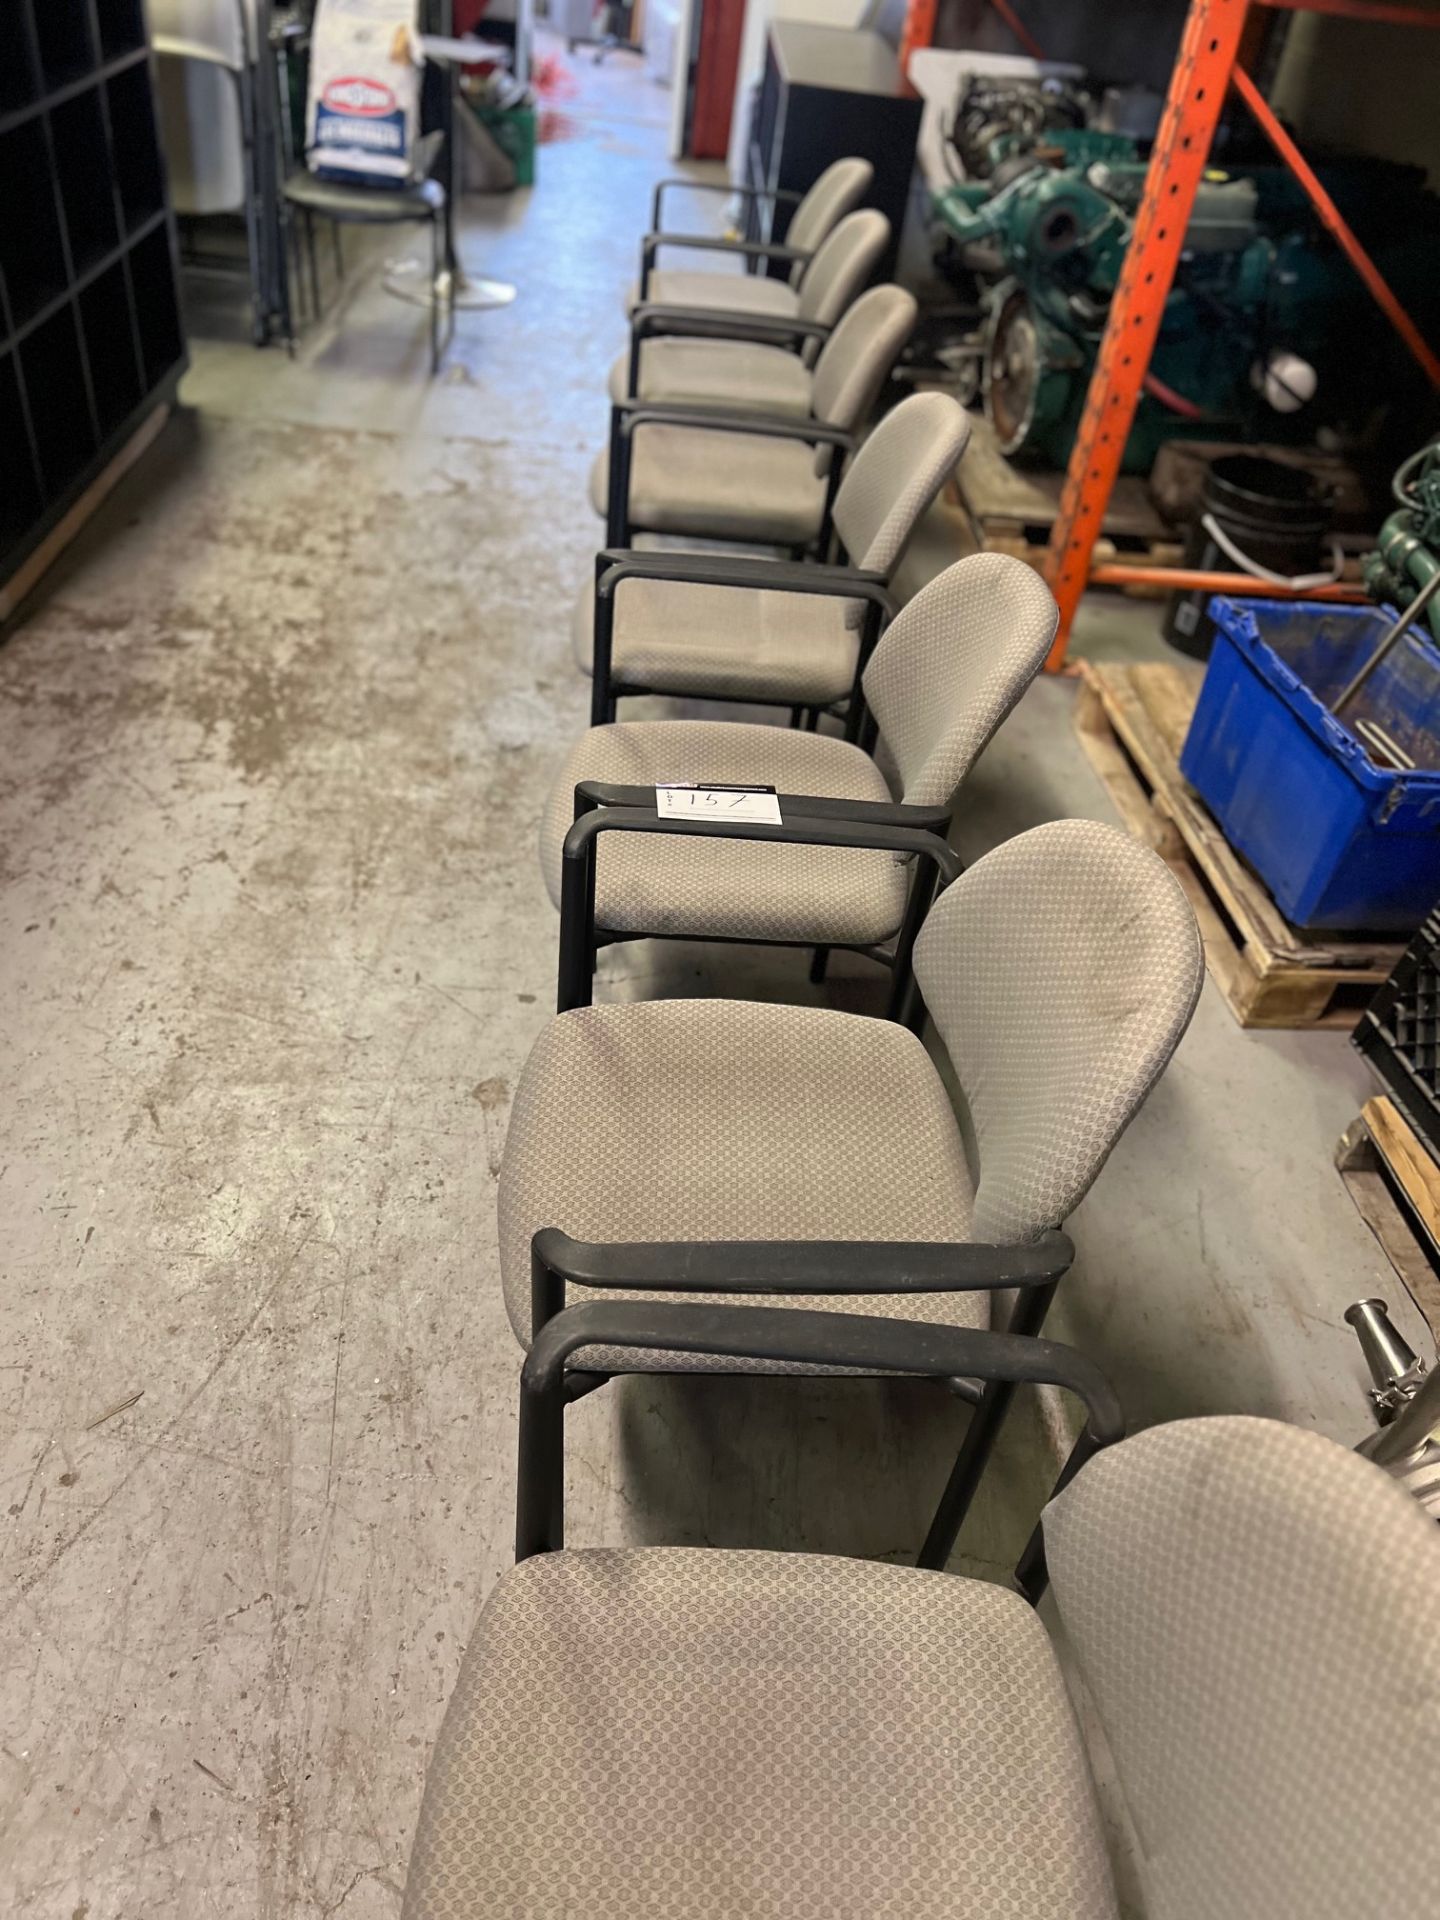 LOT/7 GREY FABRIC CHAIRS WITH BLACK METAL ARM REST - Image 2 of 3